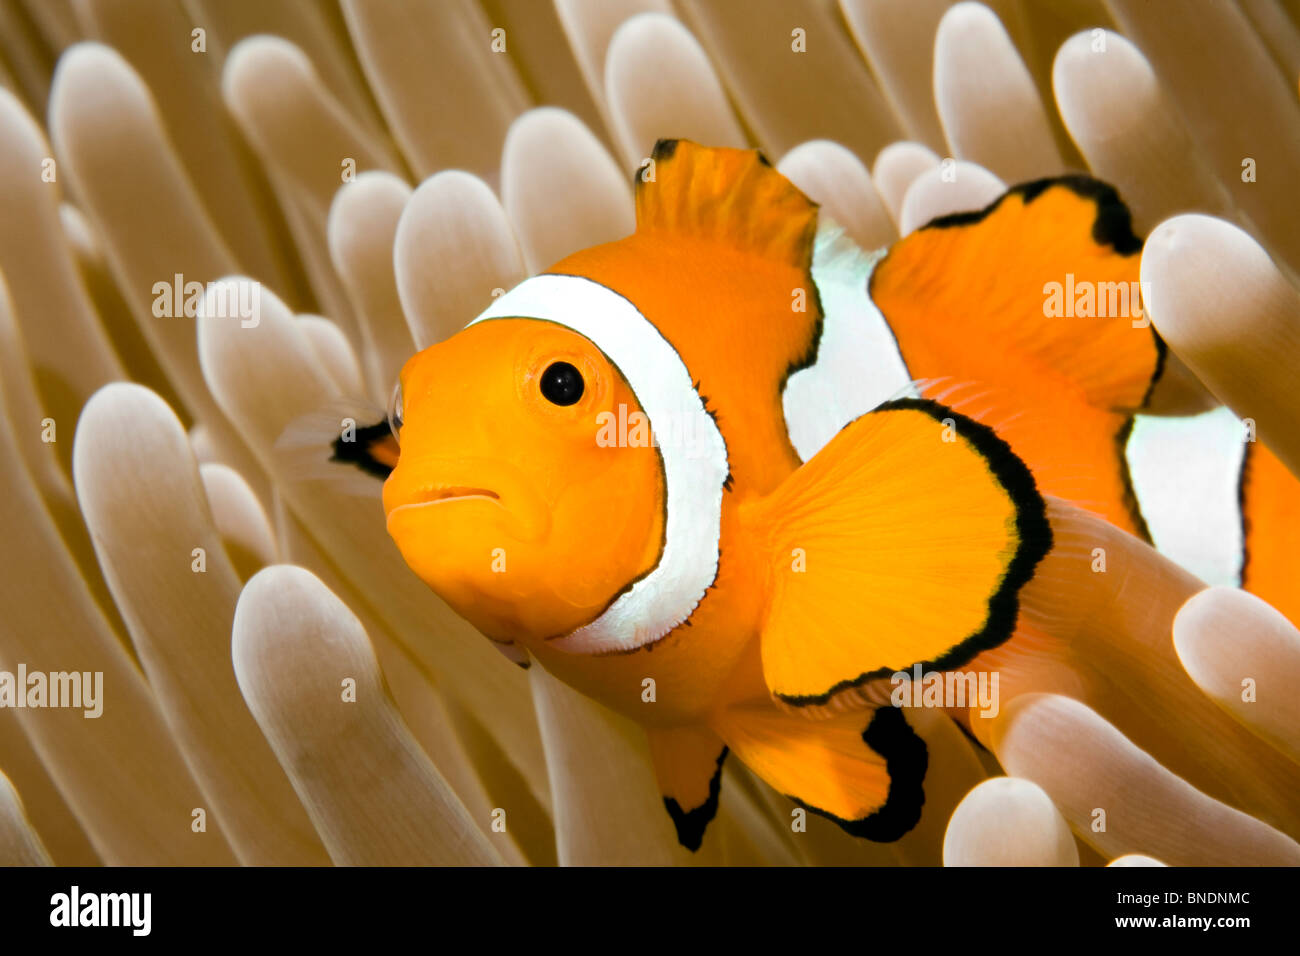 a clown anemonefish in the tentacles of its anemone, underwater. Uepi, Solomon Islands Stock Photo